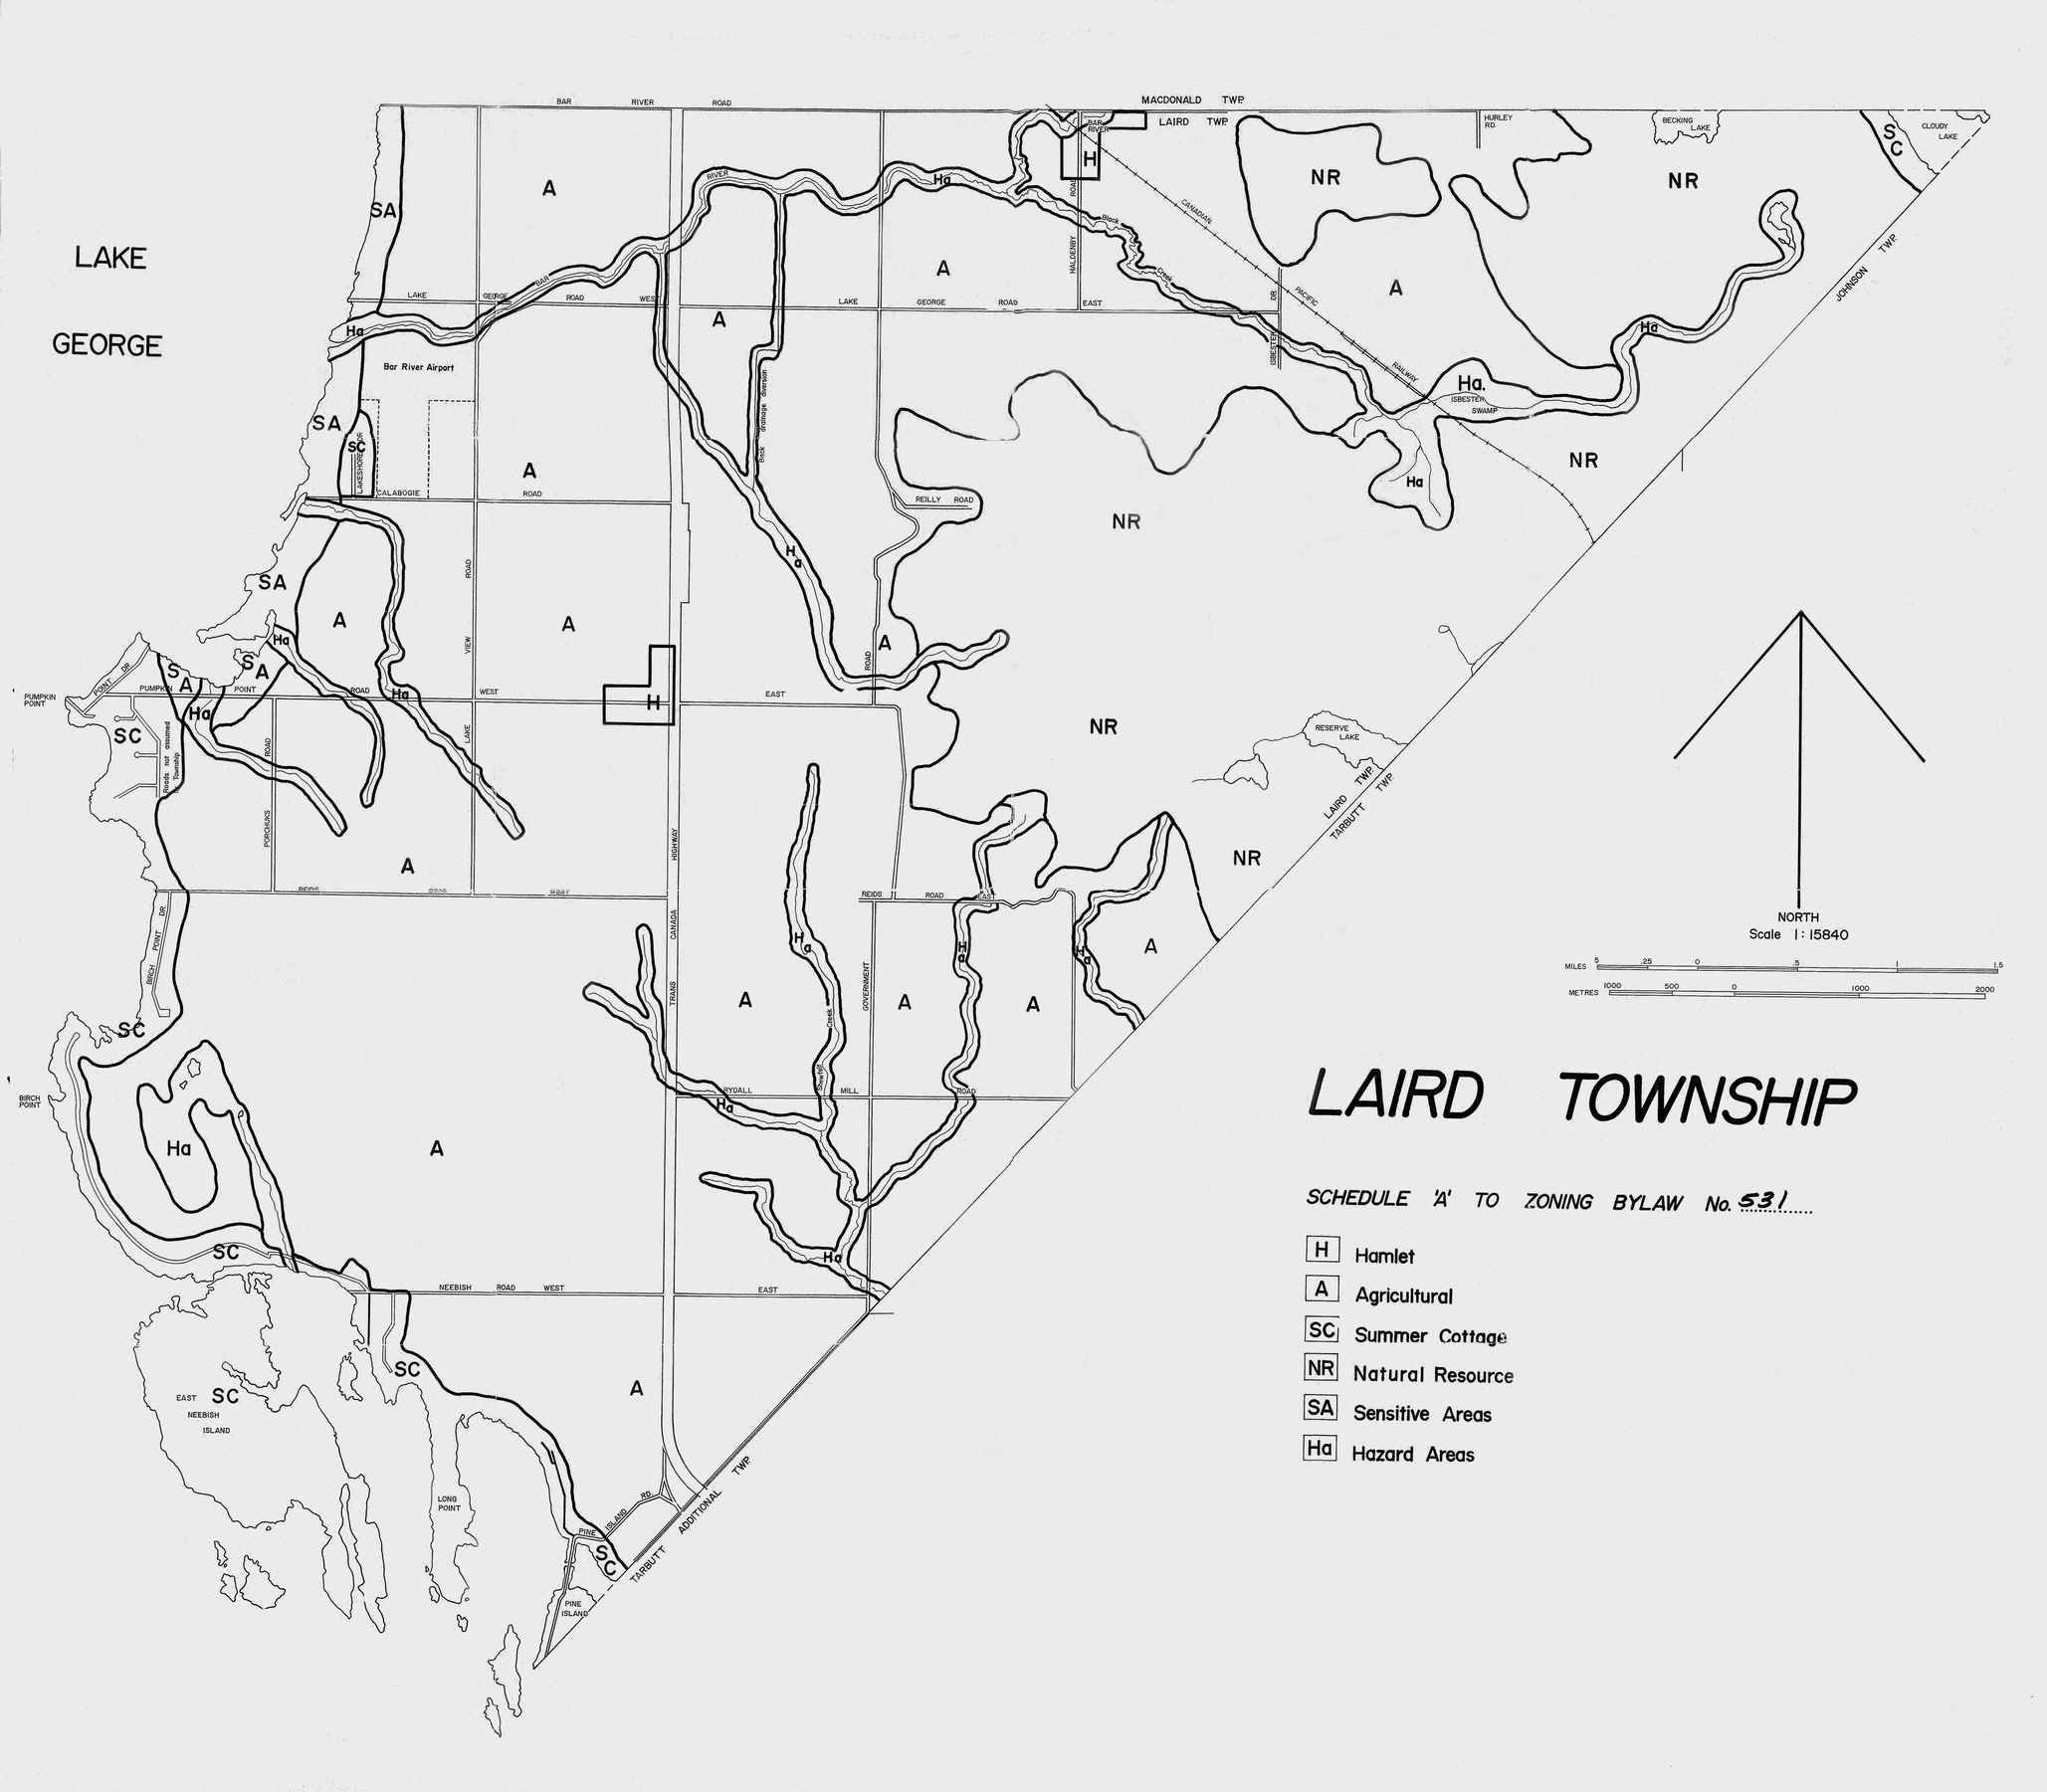 Laird Township Zoning Map